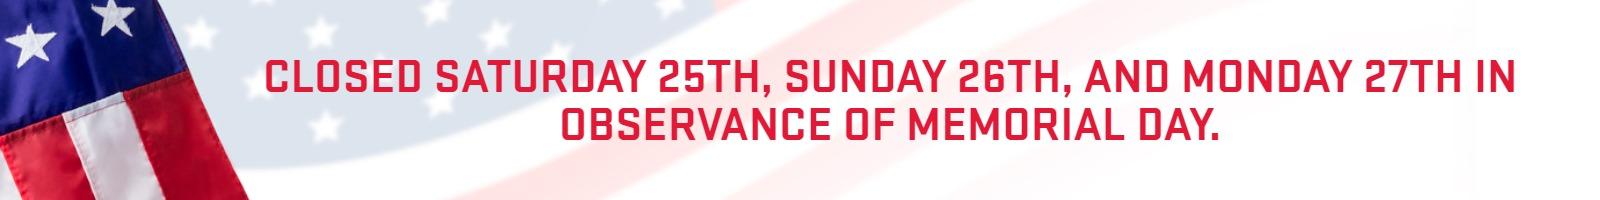 Closed Saturday 25th, Sunday 26th, and Monday 27th in observance of Memorial Day.